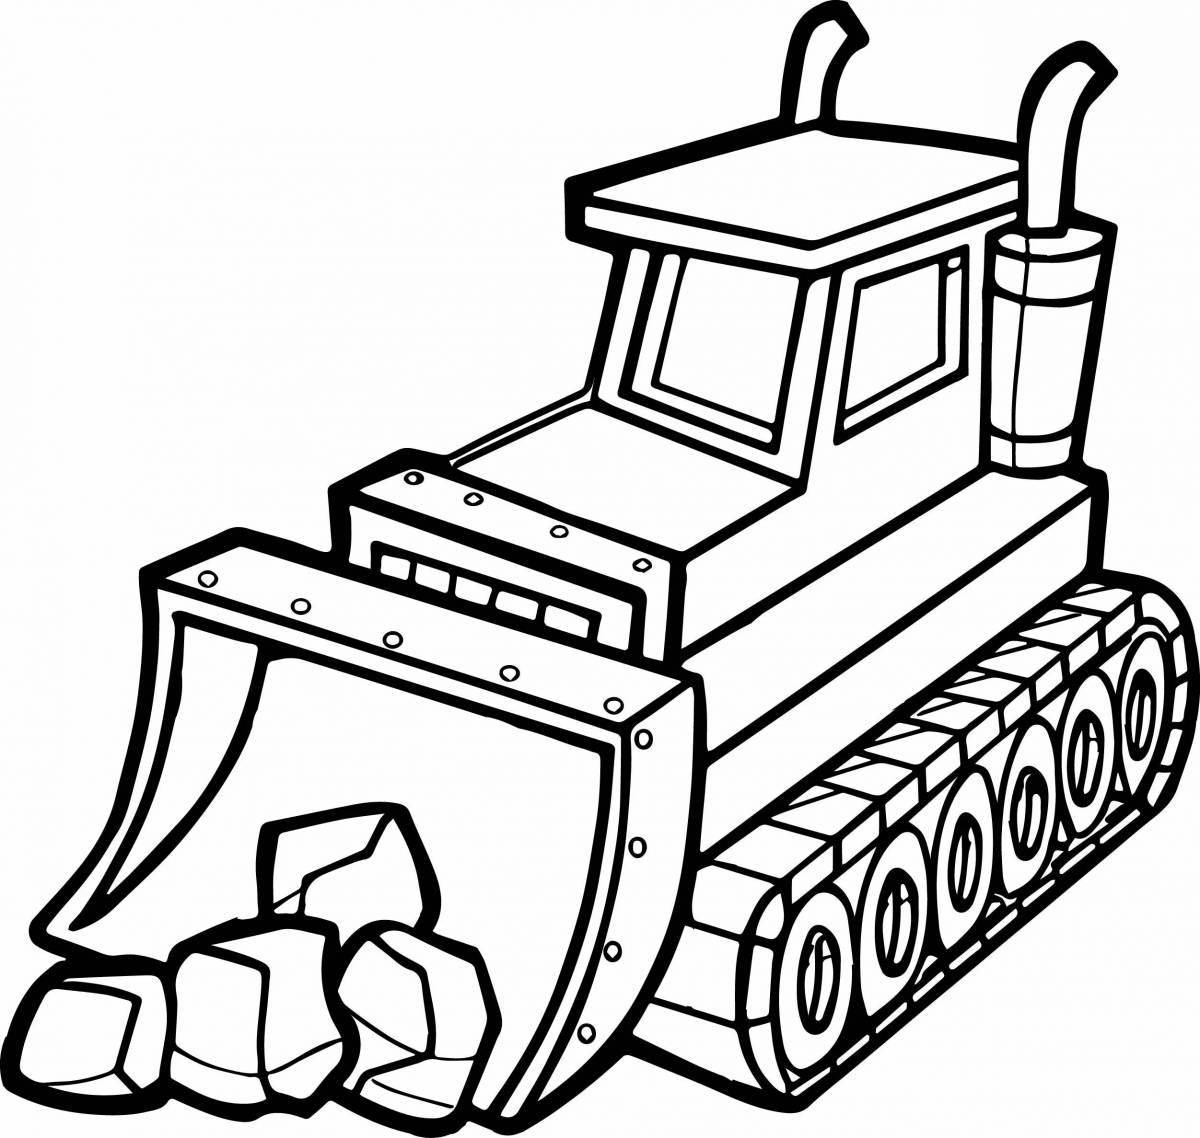 Adorable construction machinery coloring book for boys